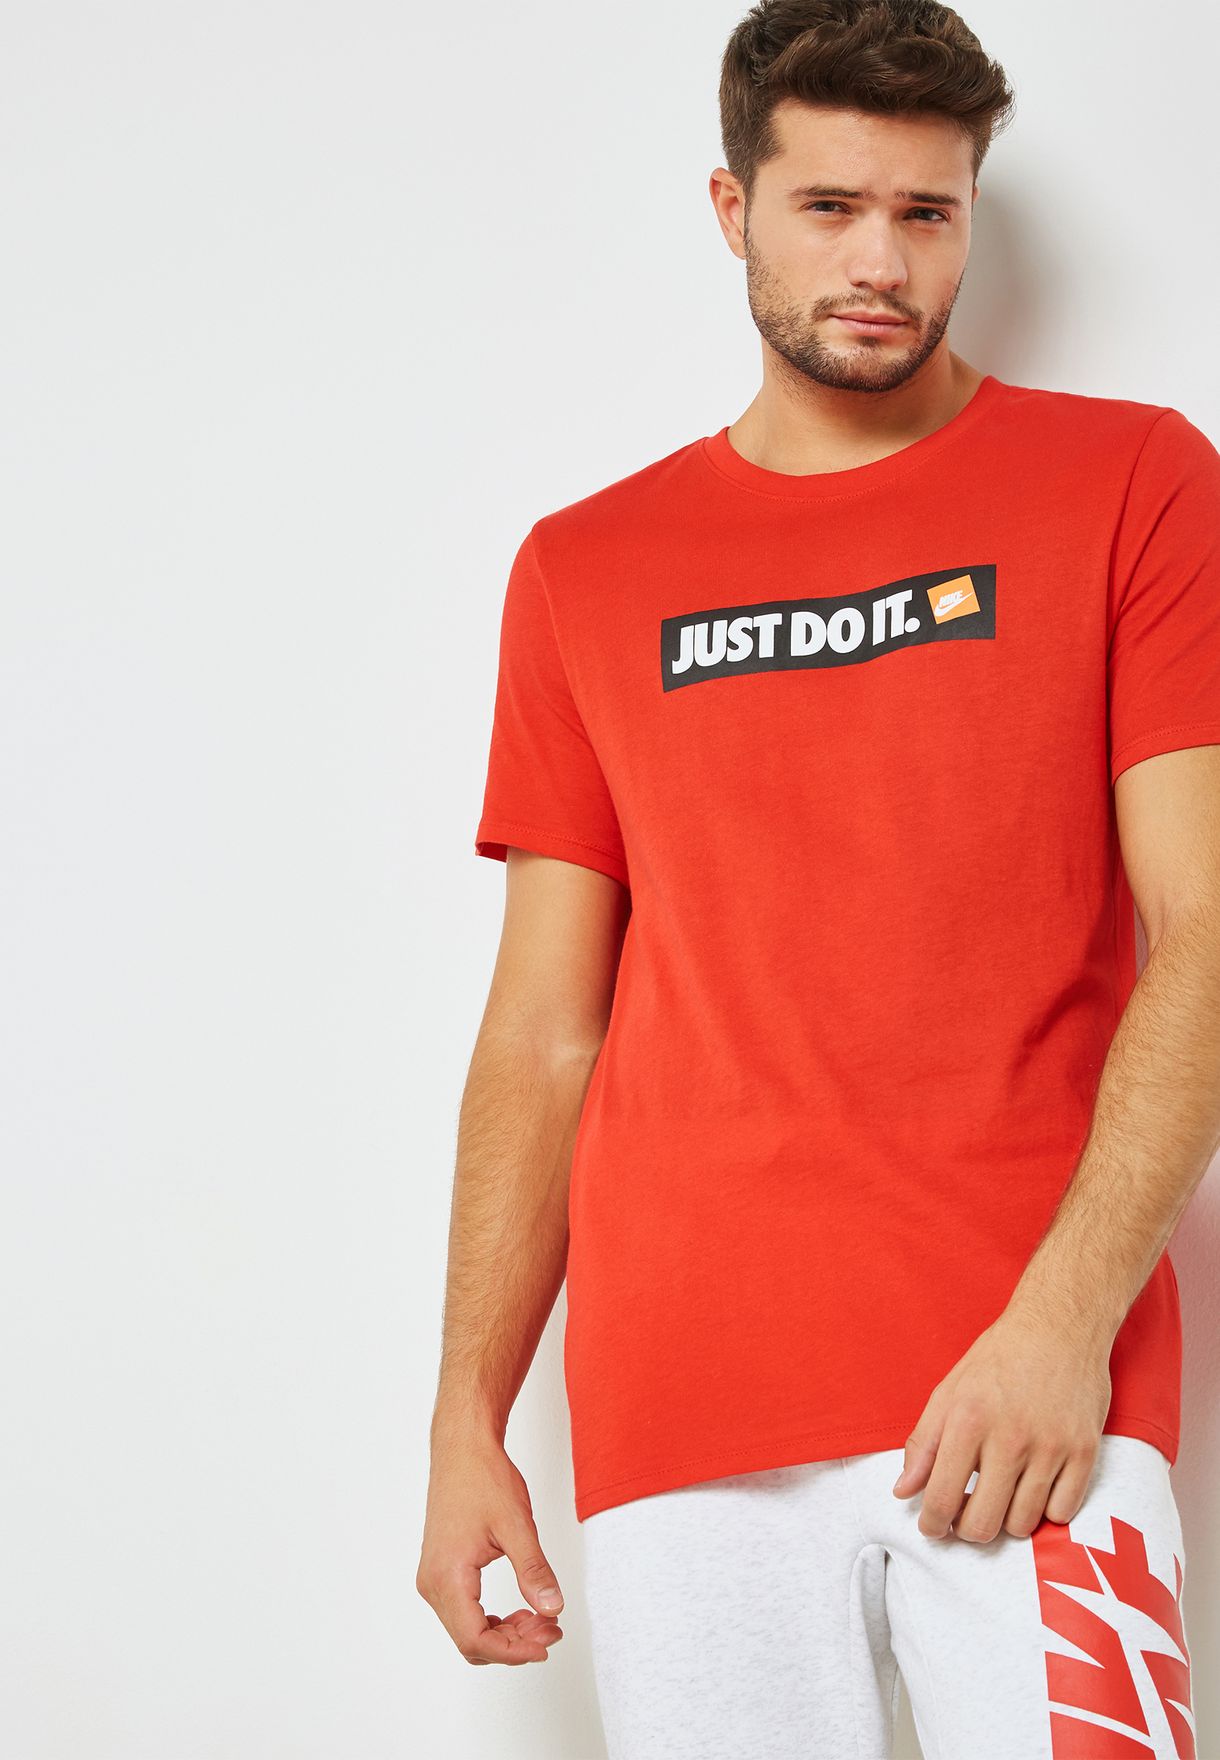 just do it red shirt